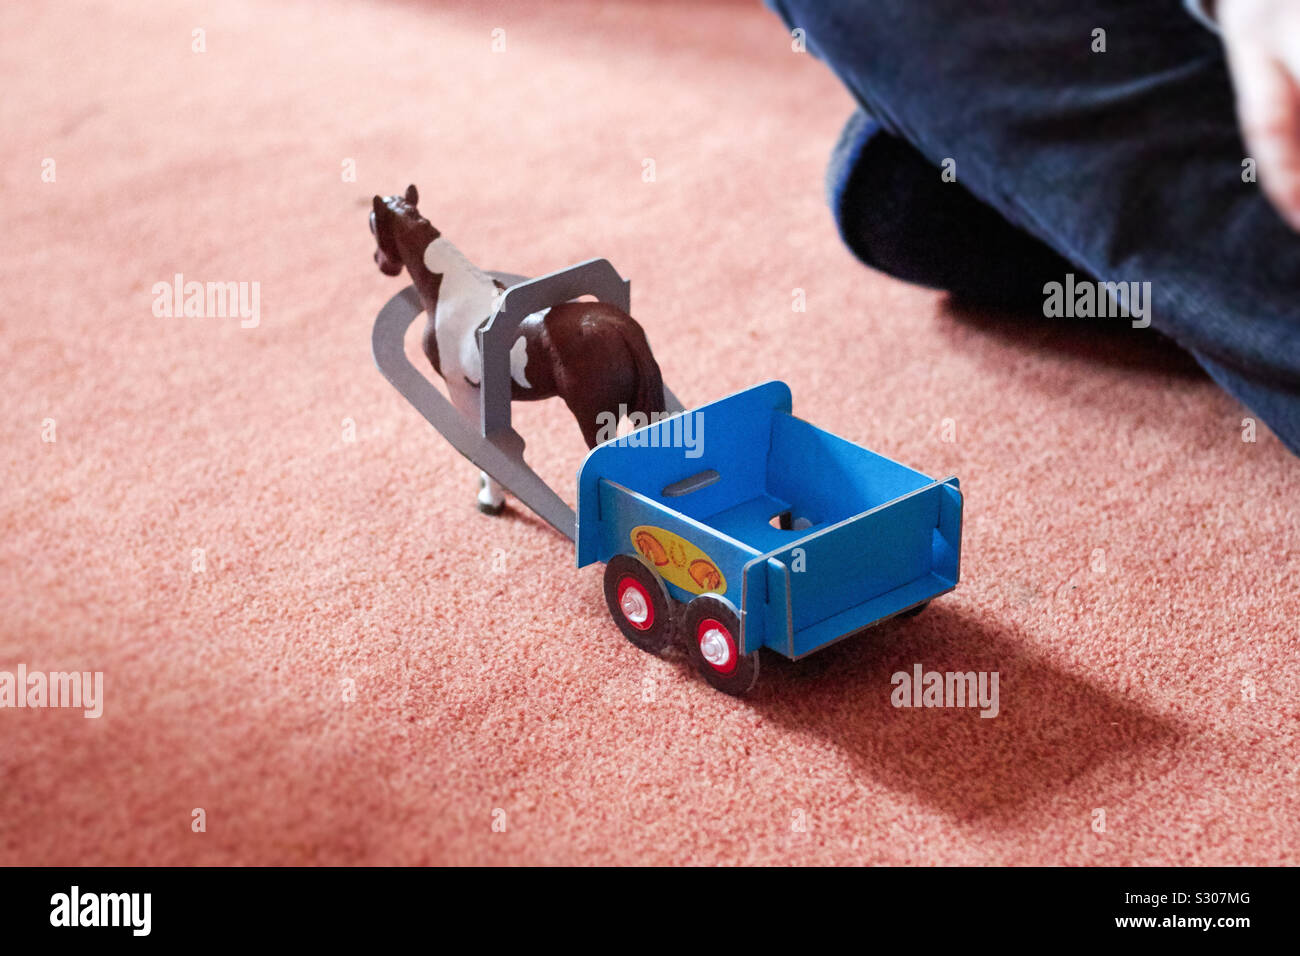 Play Horse with pendant on a terracotta carpet floor in front of a child's leg Stock Photo